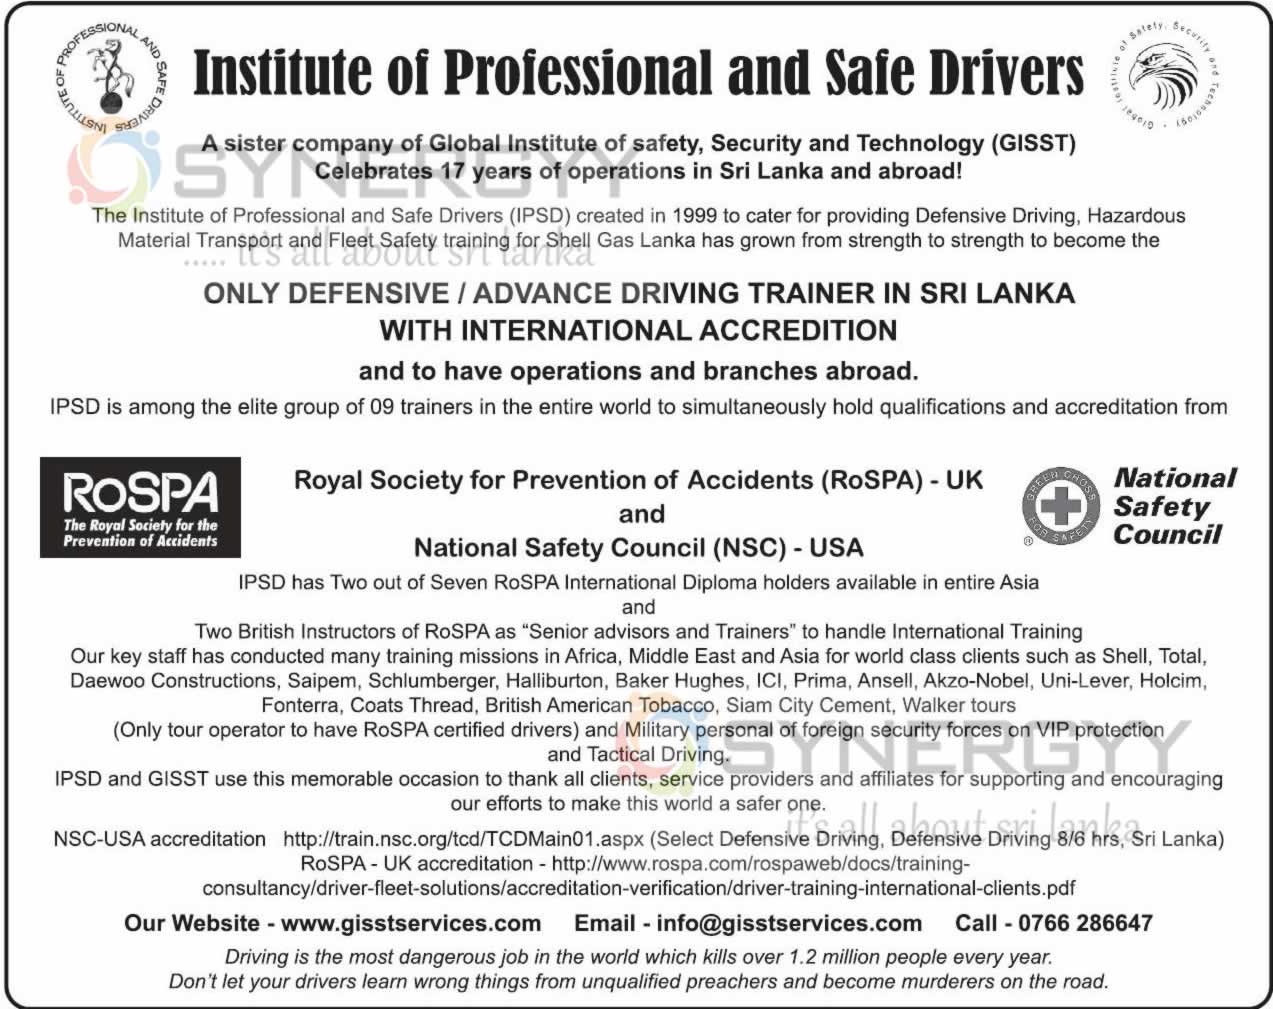 Institute of Professional and Safe Drivers – Training Programme